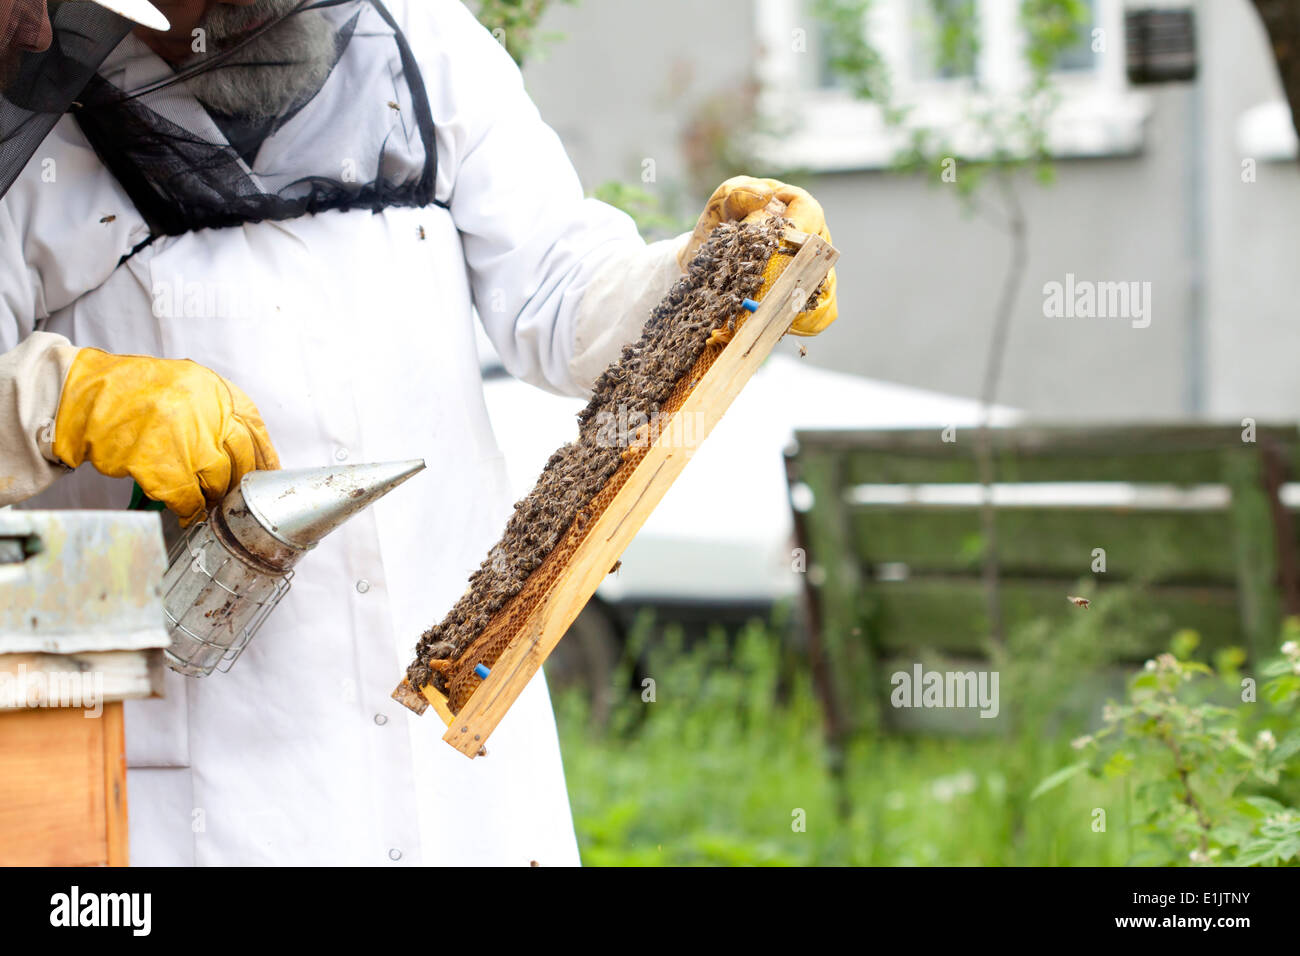 Working apiarist - Beekeeper holding a frame of honeycomb Stock Photo